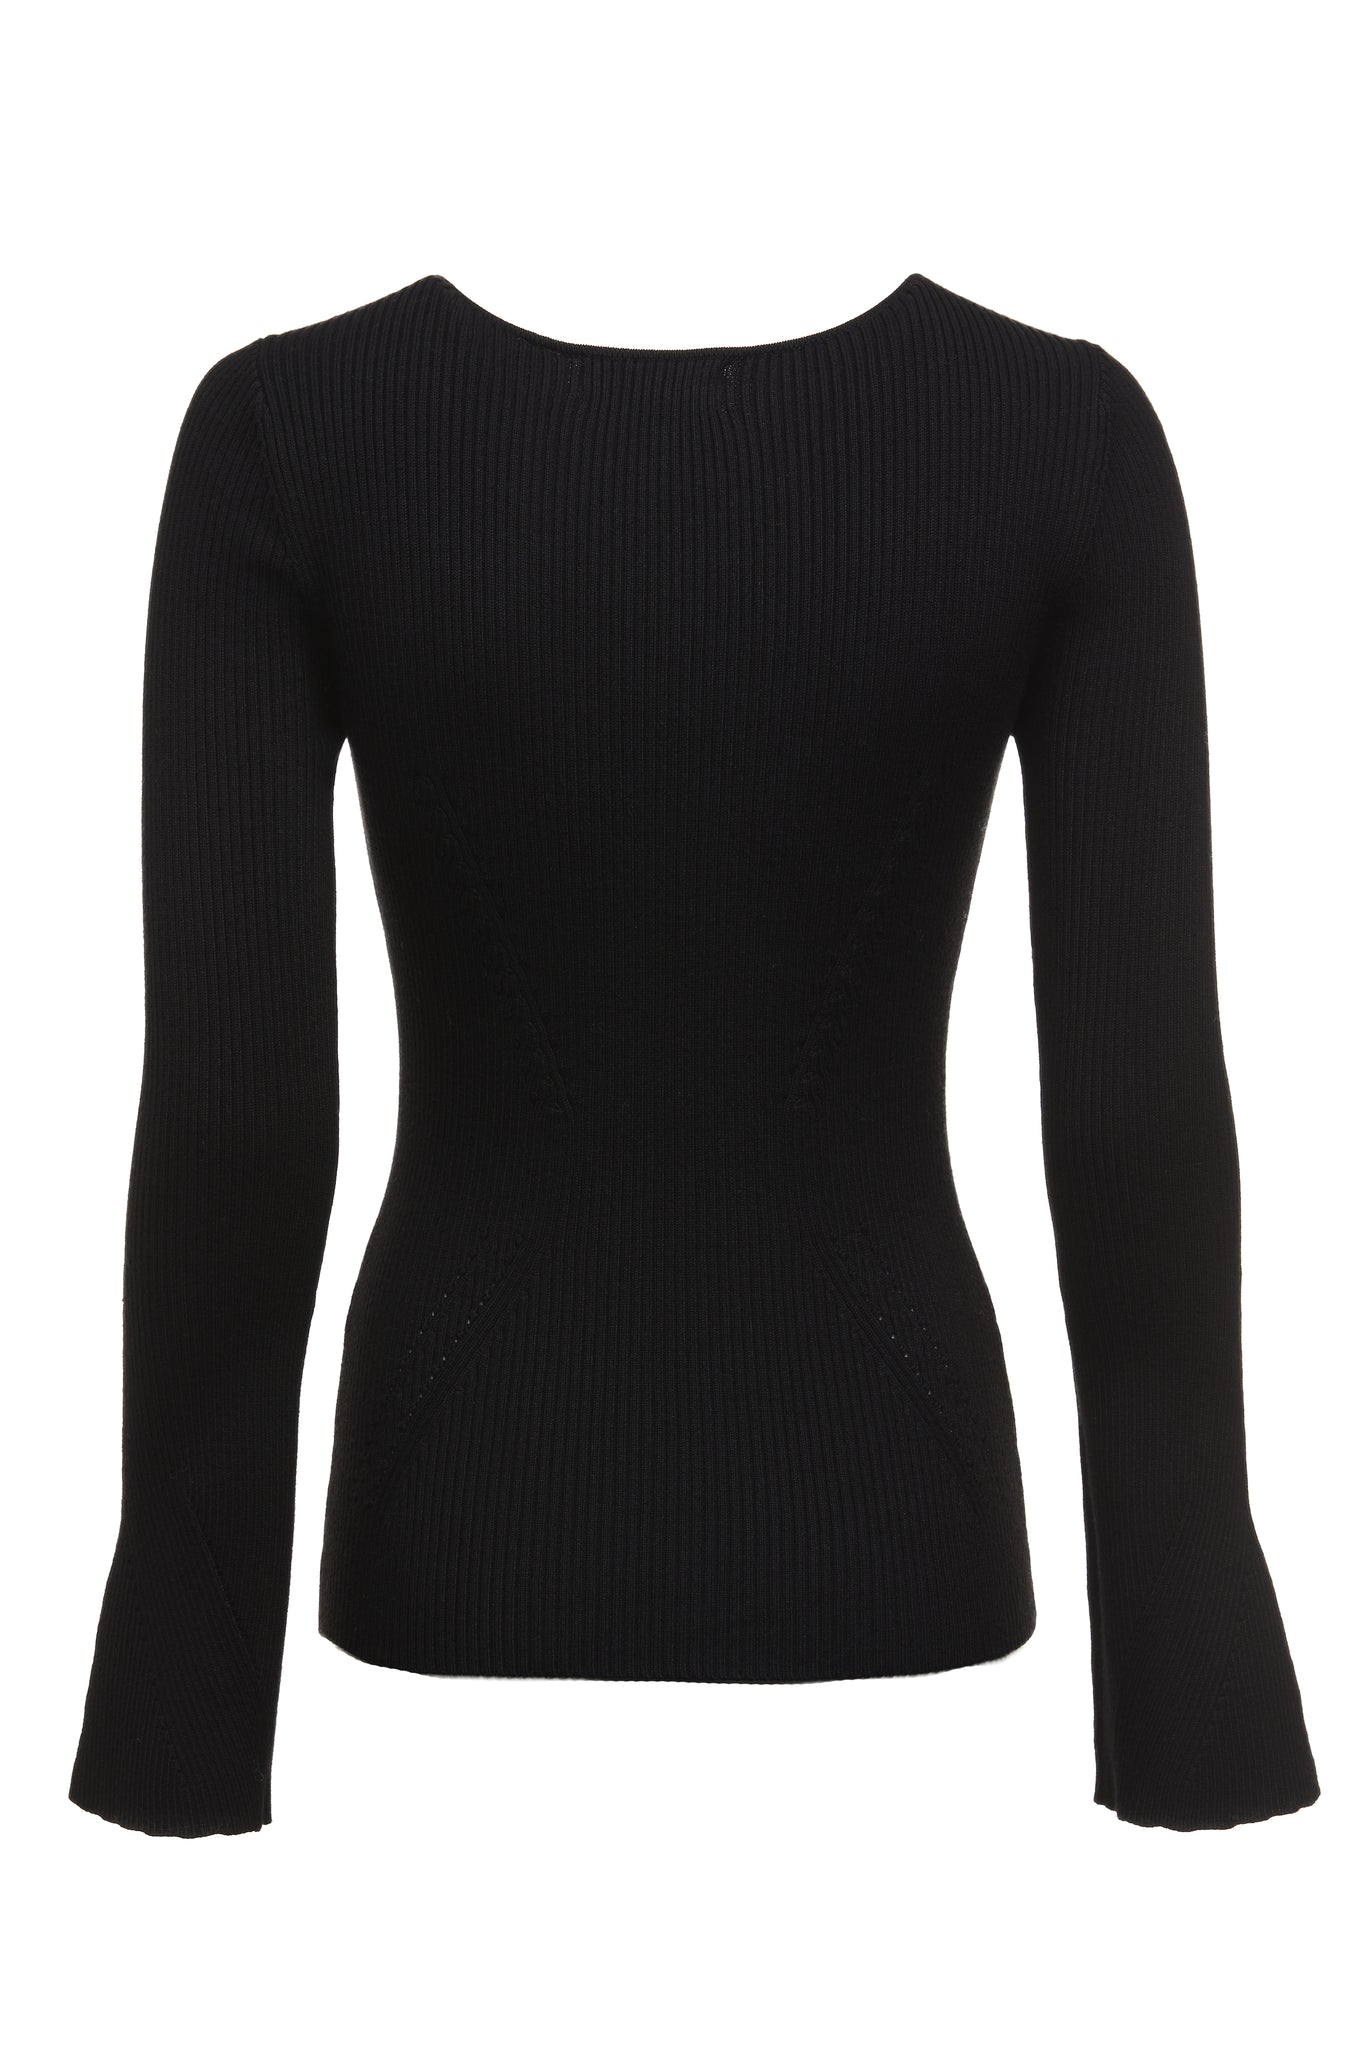 back of a form fitting lightweight ribbed knit black jumper with a boat neckline and bell sleeves